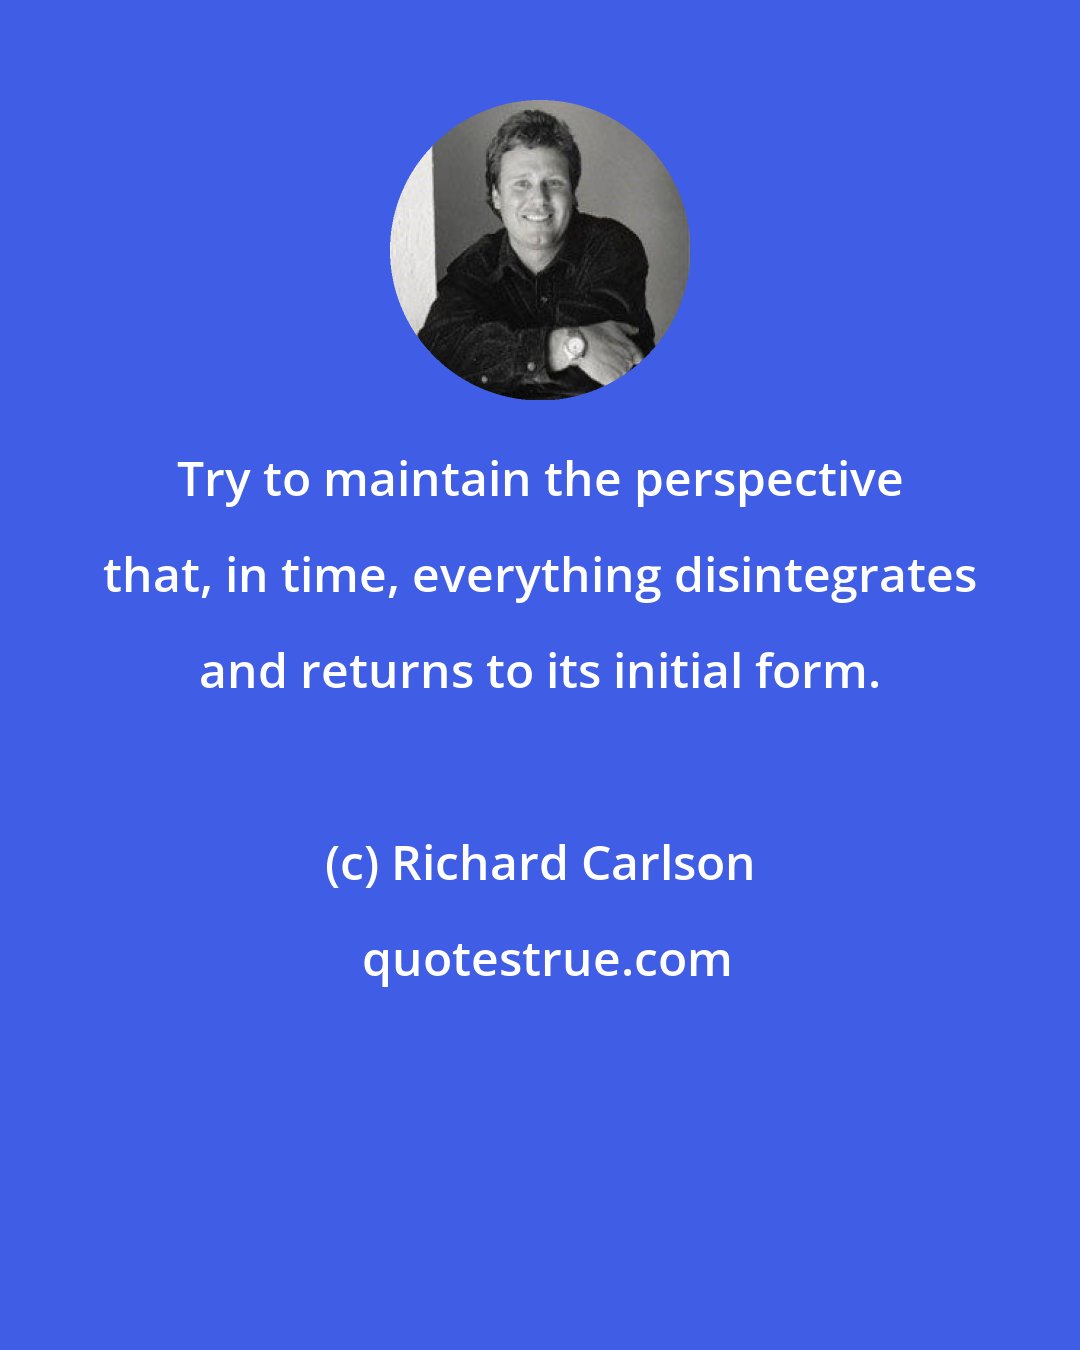 Richard Carlson: Try to maintain the perspective that, in time, everything disintegrates and returns to its initial form.